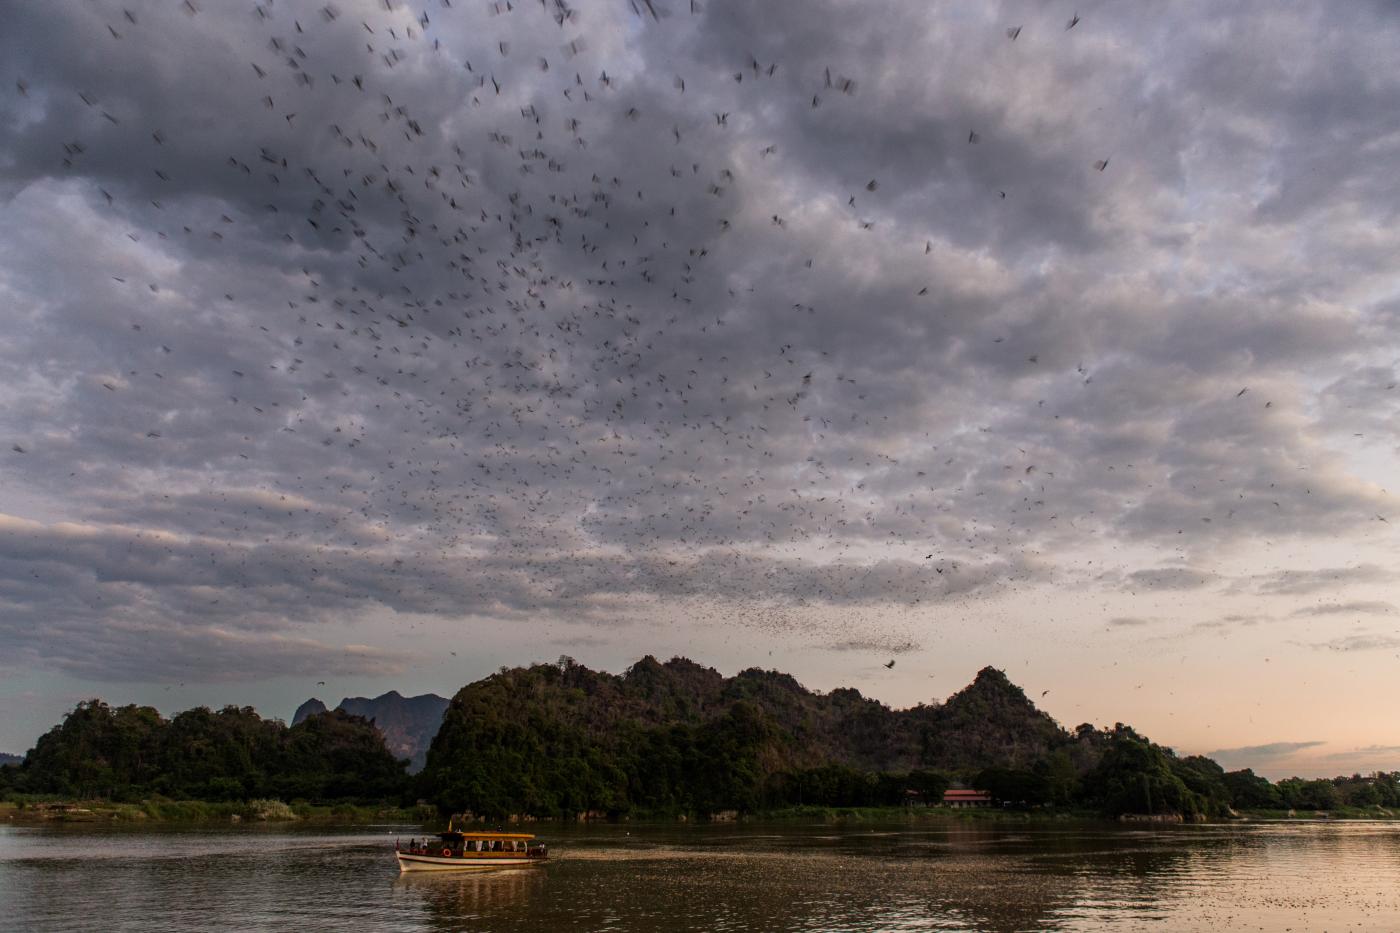 A flock of wrinkle-lipped bats flys over Thanlyin River near Linno Cave in the Hpa An region of Myanmar